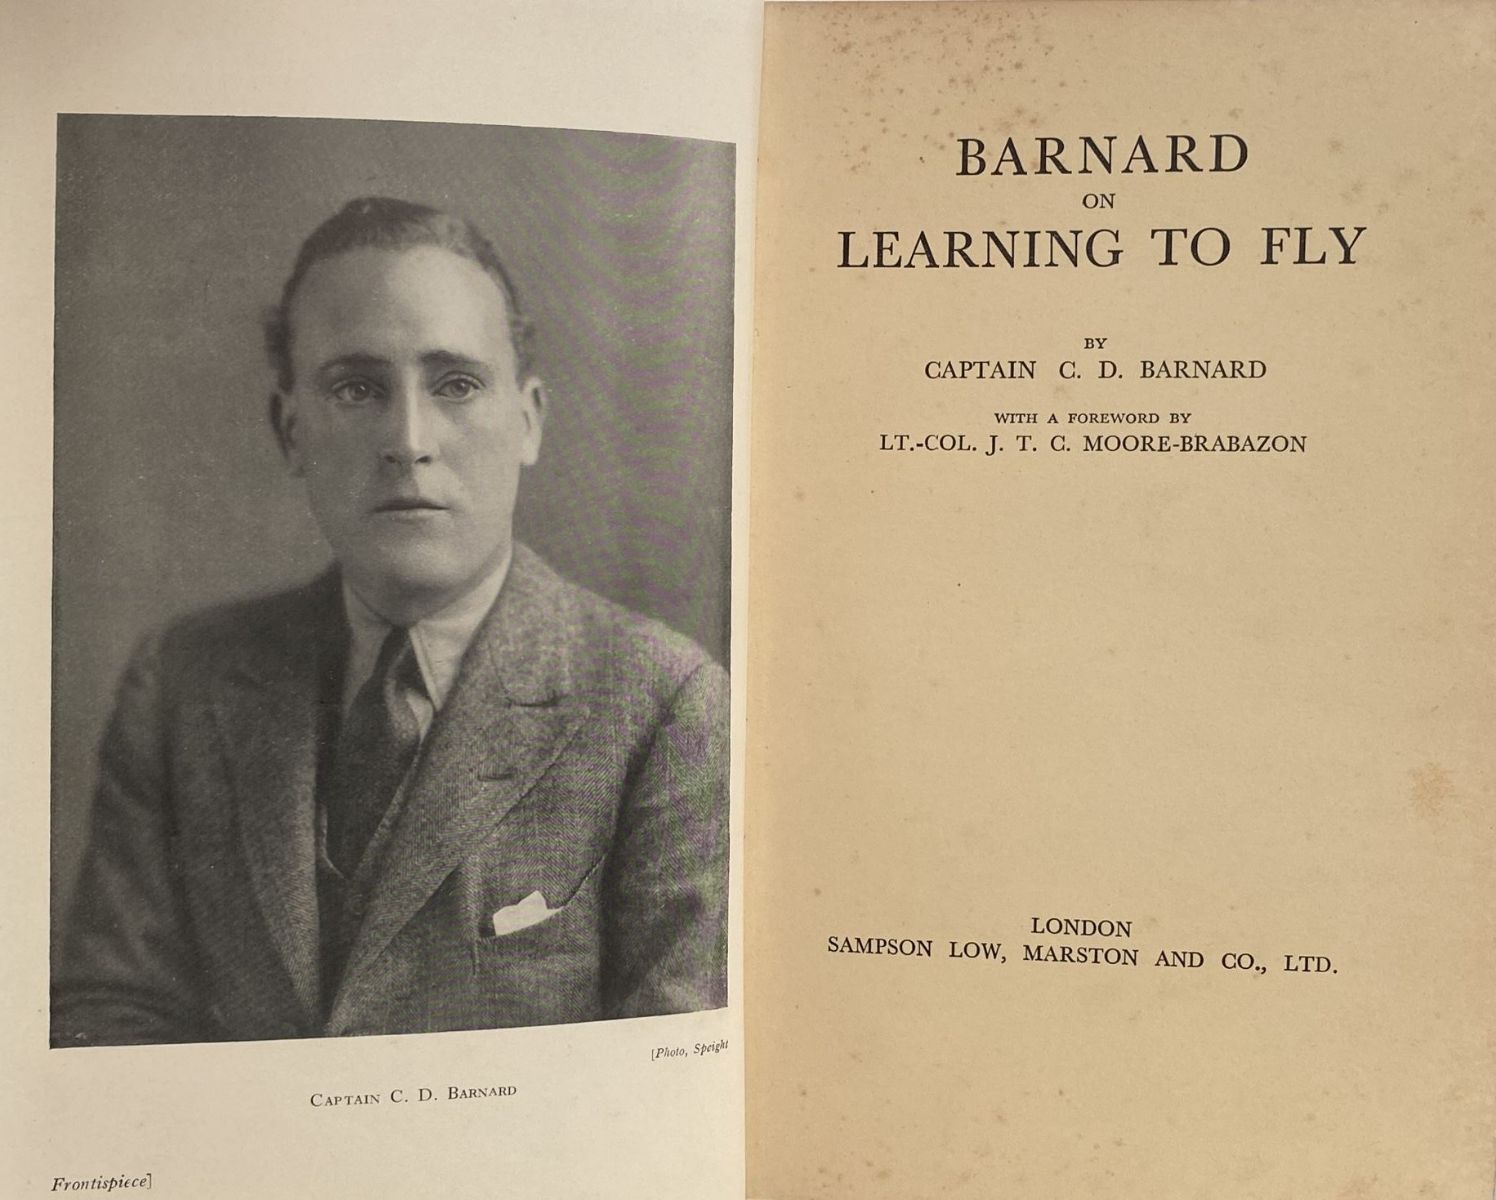 BARNARD ON LEARNING TO FLY